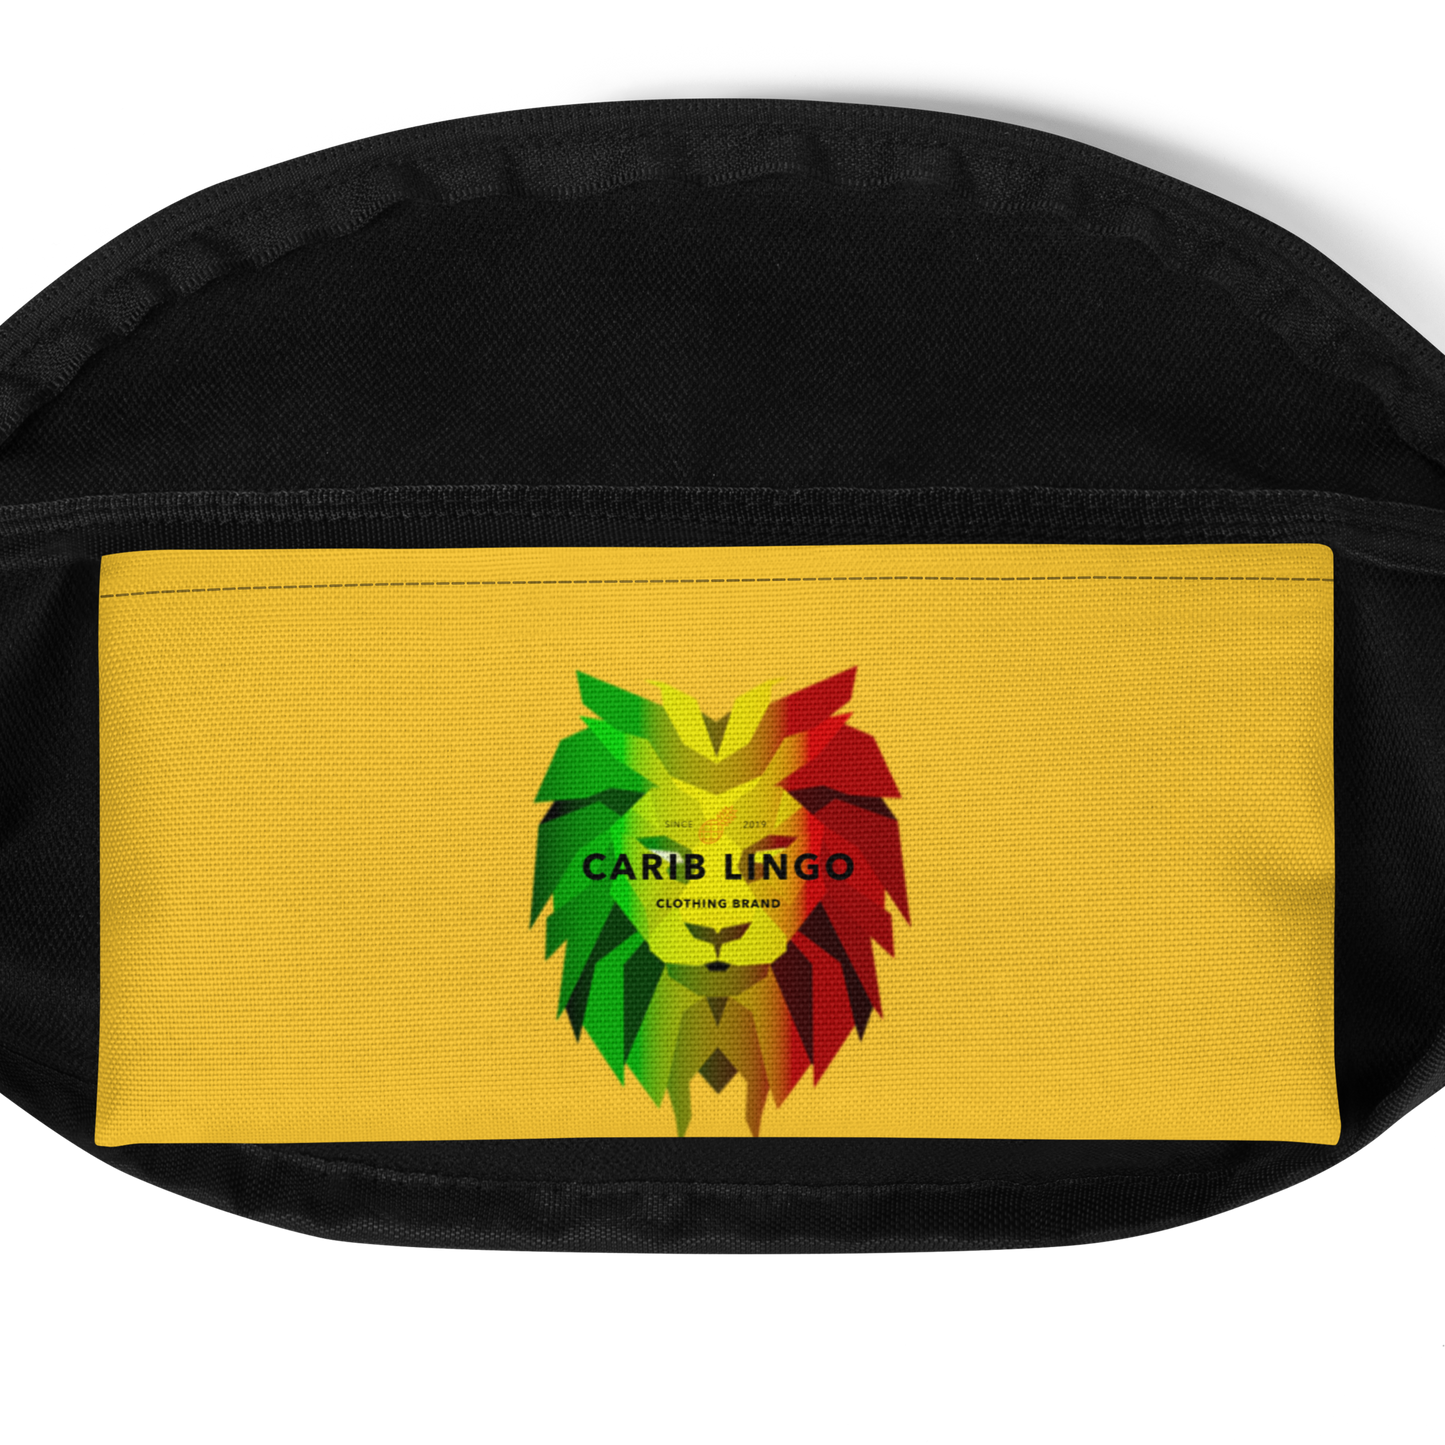 I Am Rooting: Caribbean Fanny Pack